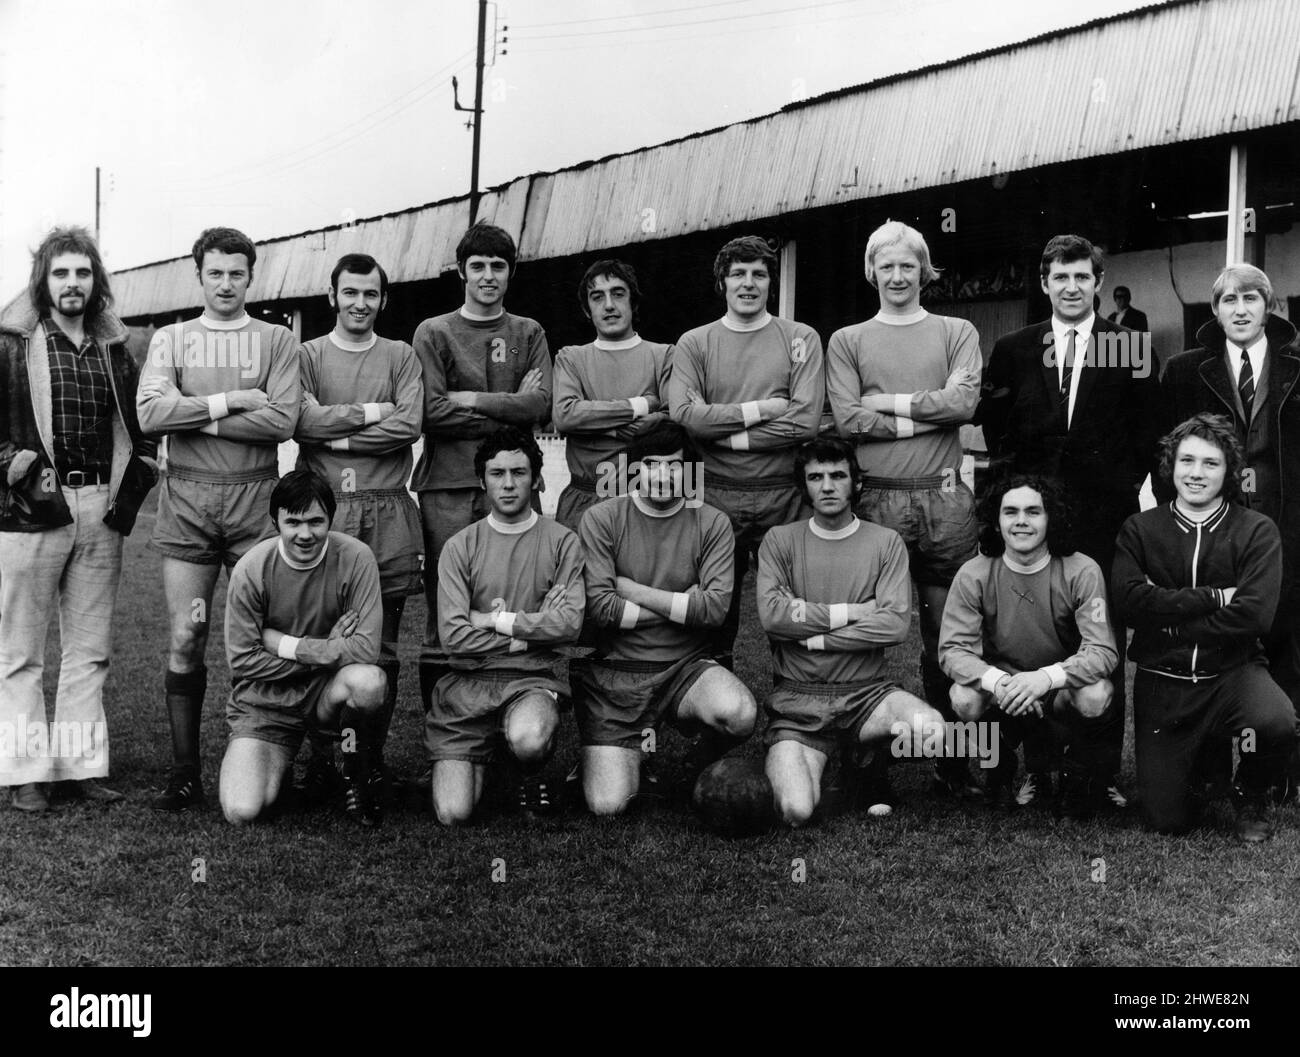 Billingham Synthonia, Football Team 7th November 1970. Billingham Synthonia team of the week. Back row, left to right, T Cockeron, E Nobbs, J Harrison, P Reid, G Jewson, G Bonson, N Maltby, R L Chapman (coach), and A Hickman. Front row, left to right, B Mulligan, D Jeffs, D Collins, T Hetherington, R James and H Thompson. Stock Photo